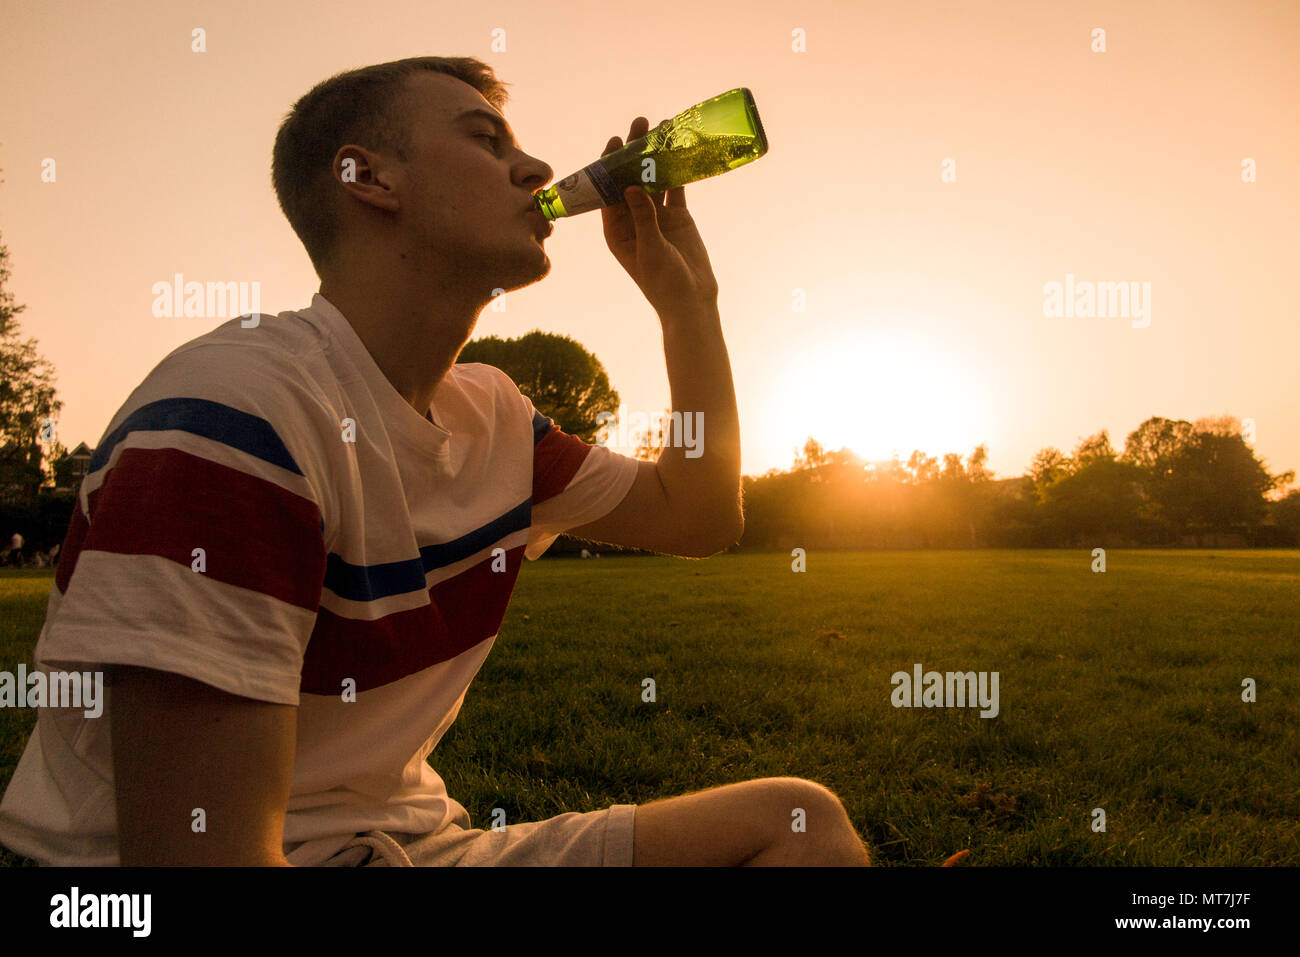 A teenager drinks from a beer bottle as the sun sets in an urban setting Stock Photo